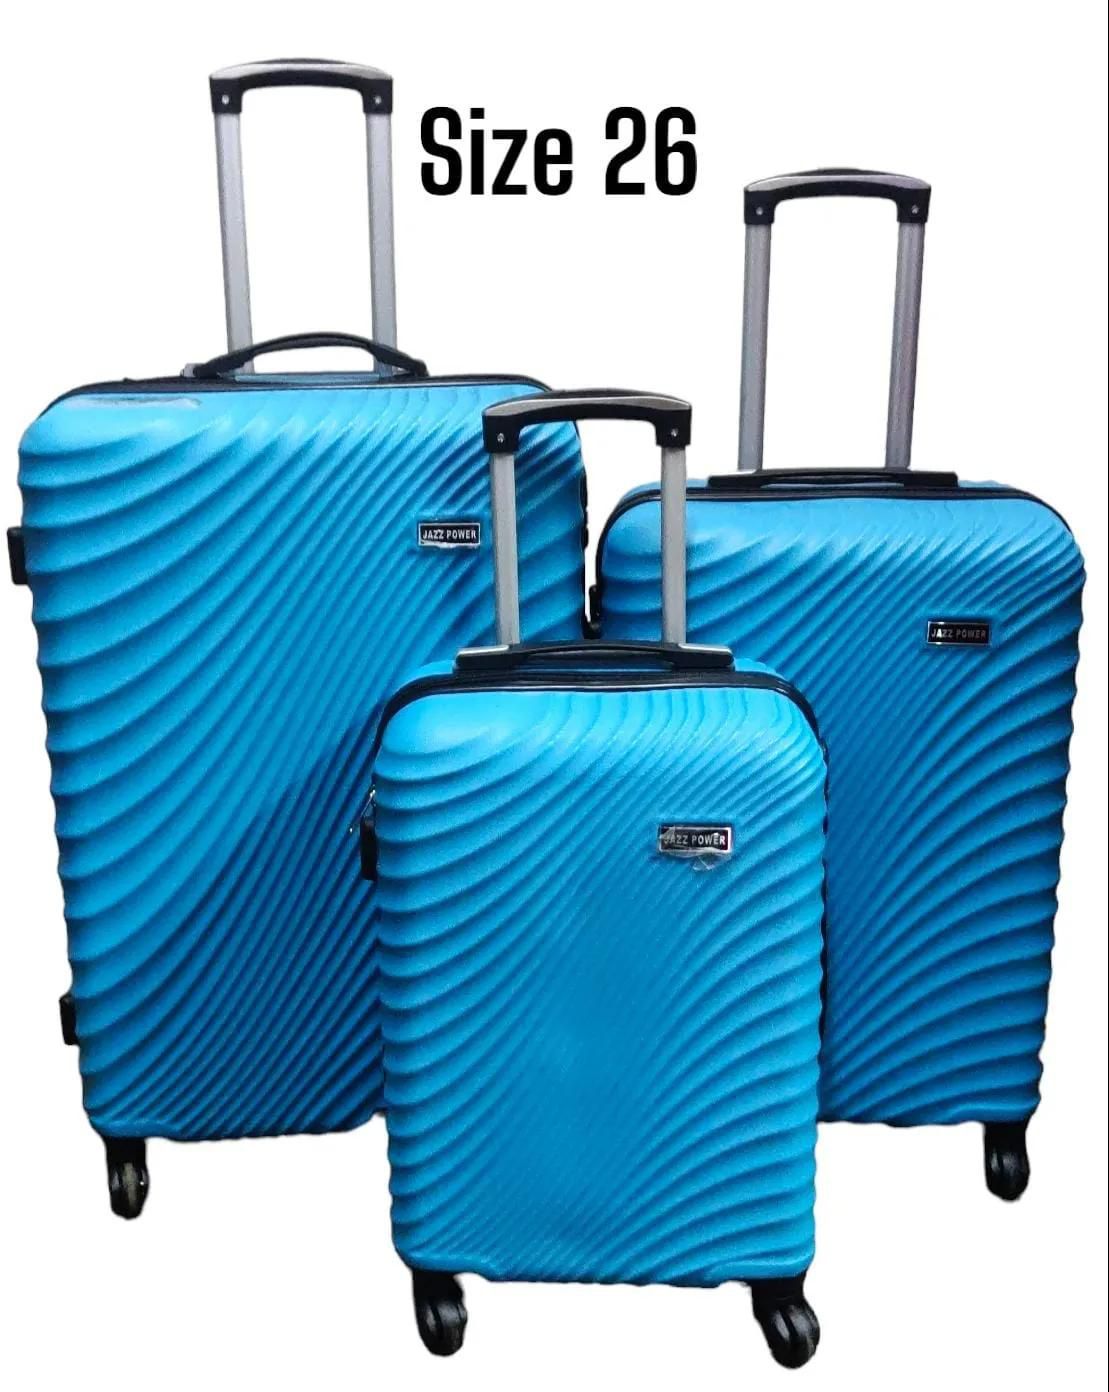 3 in 1 Hot Fashion Travel On Road Luggage Suitcase Protective1. Keep dry and store in a cool and ventilated place. To Avoid exposure to the sun, fire, washing, sharp objects and co